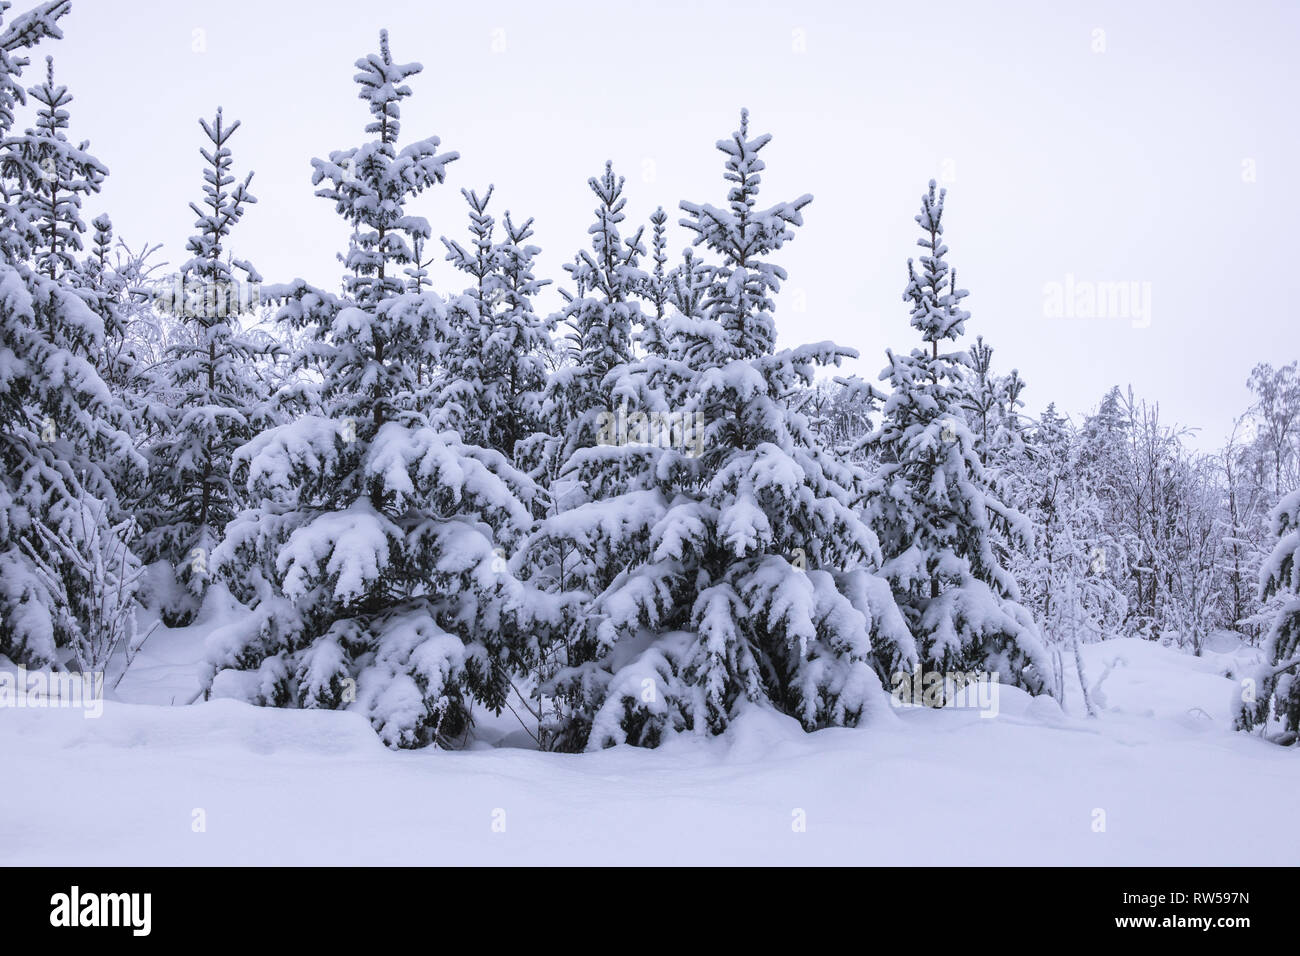 Snowy forest. Fir trees in winter landscape with thick snow. Stock Photo